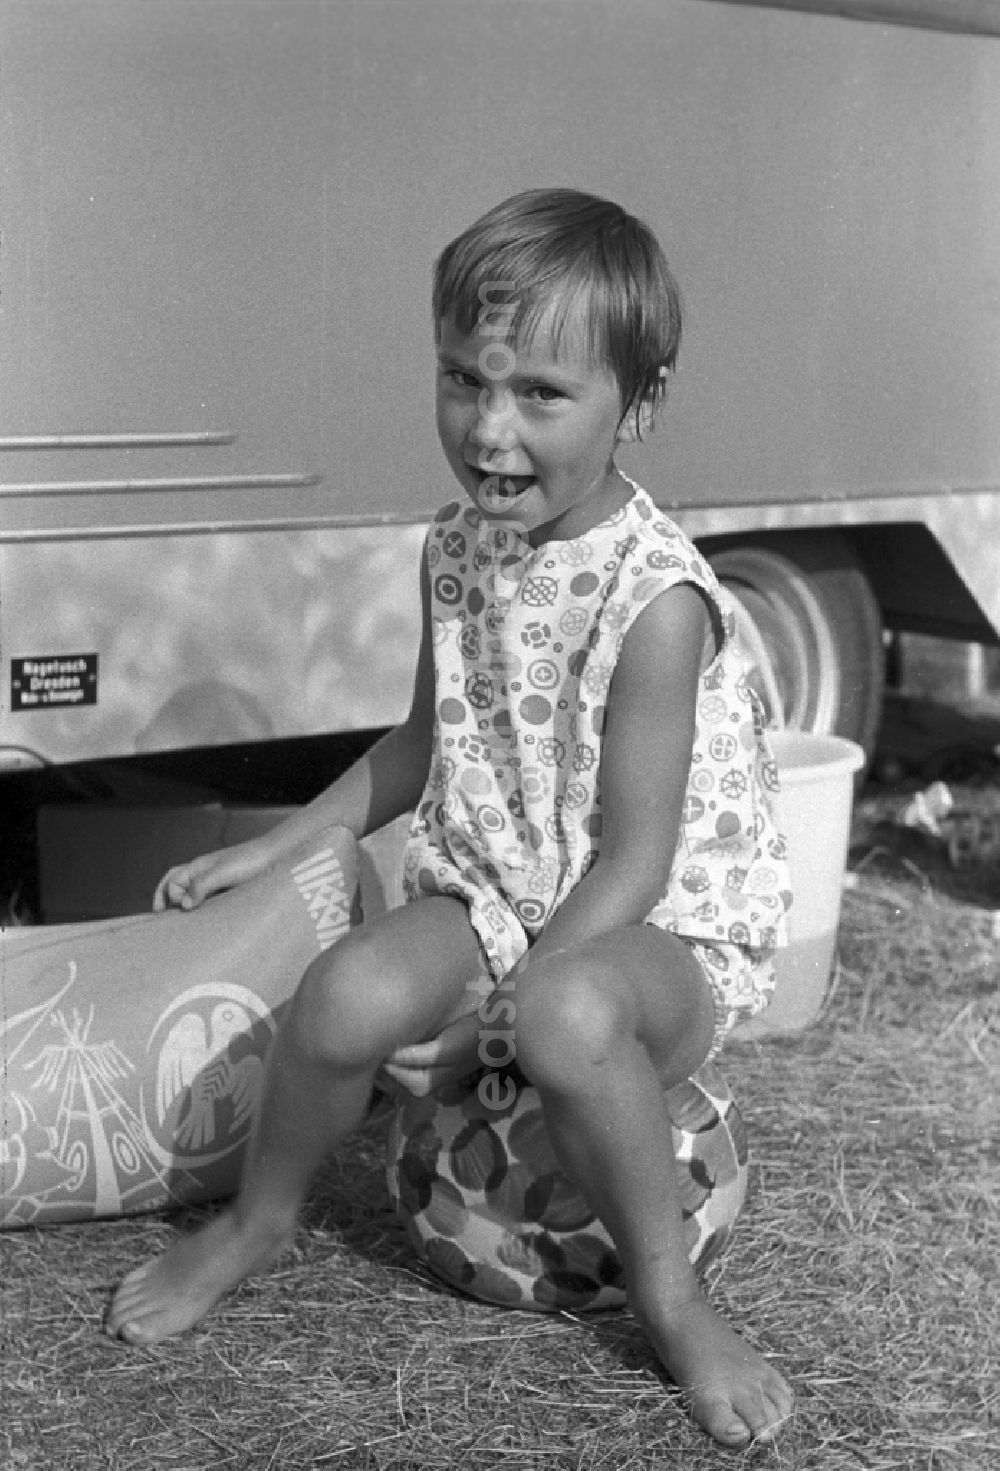 GDR picture archive: Neuruppin OT Stendenitz - A small child sits on a ball, laughing mischievously in Brandenburg. Family camping holidays at Rottstielfließ on Tornowsee in Brandenburg